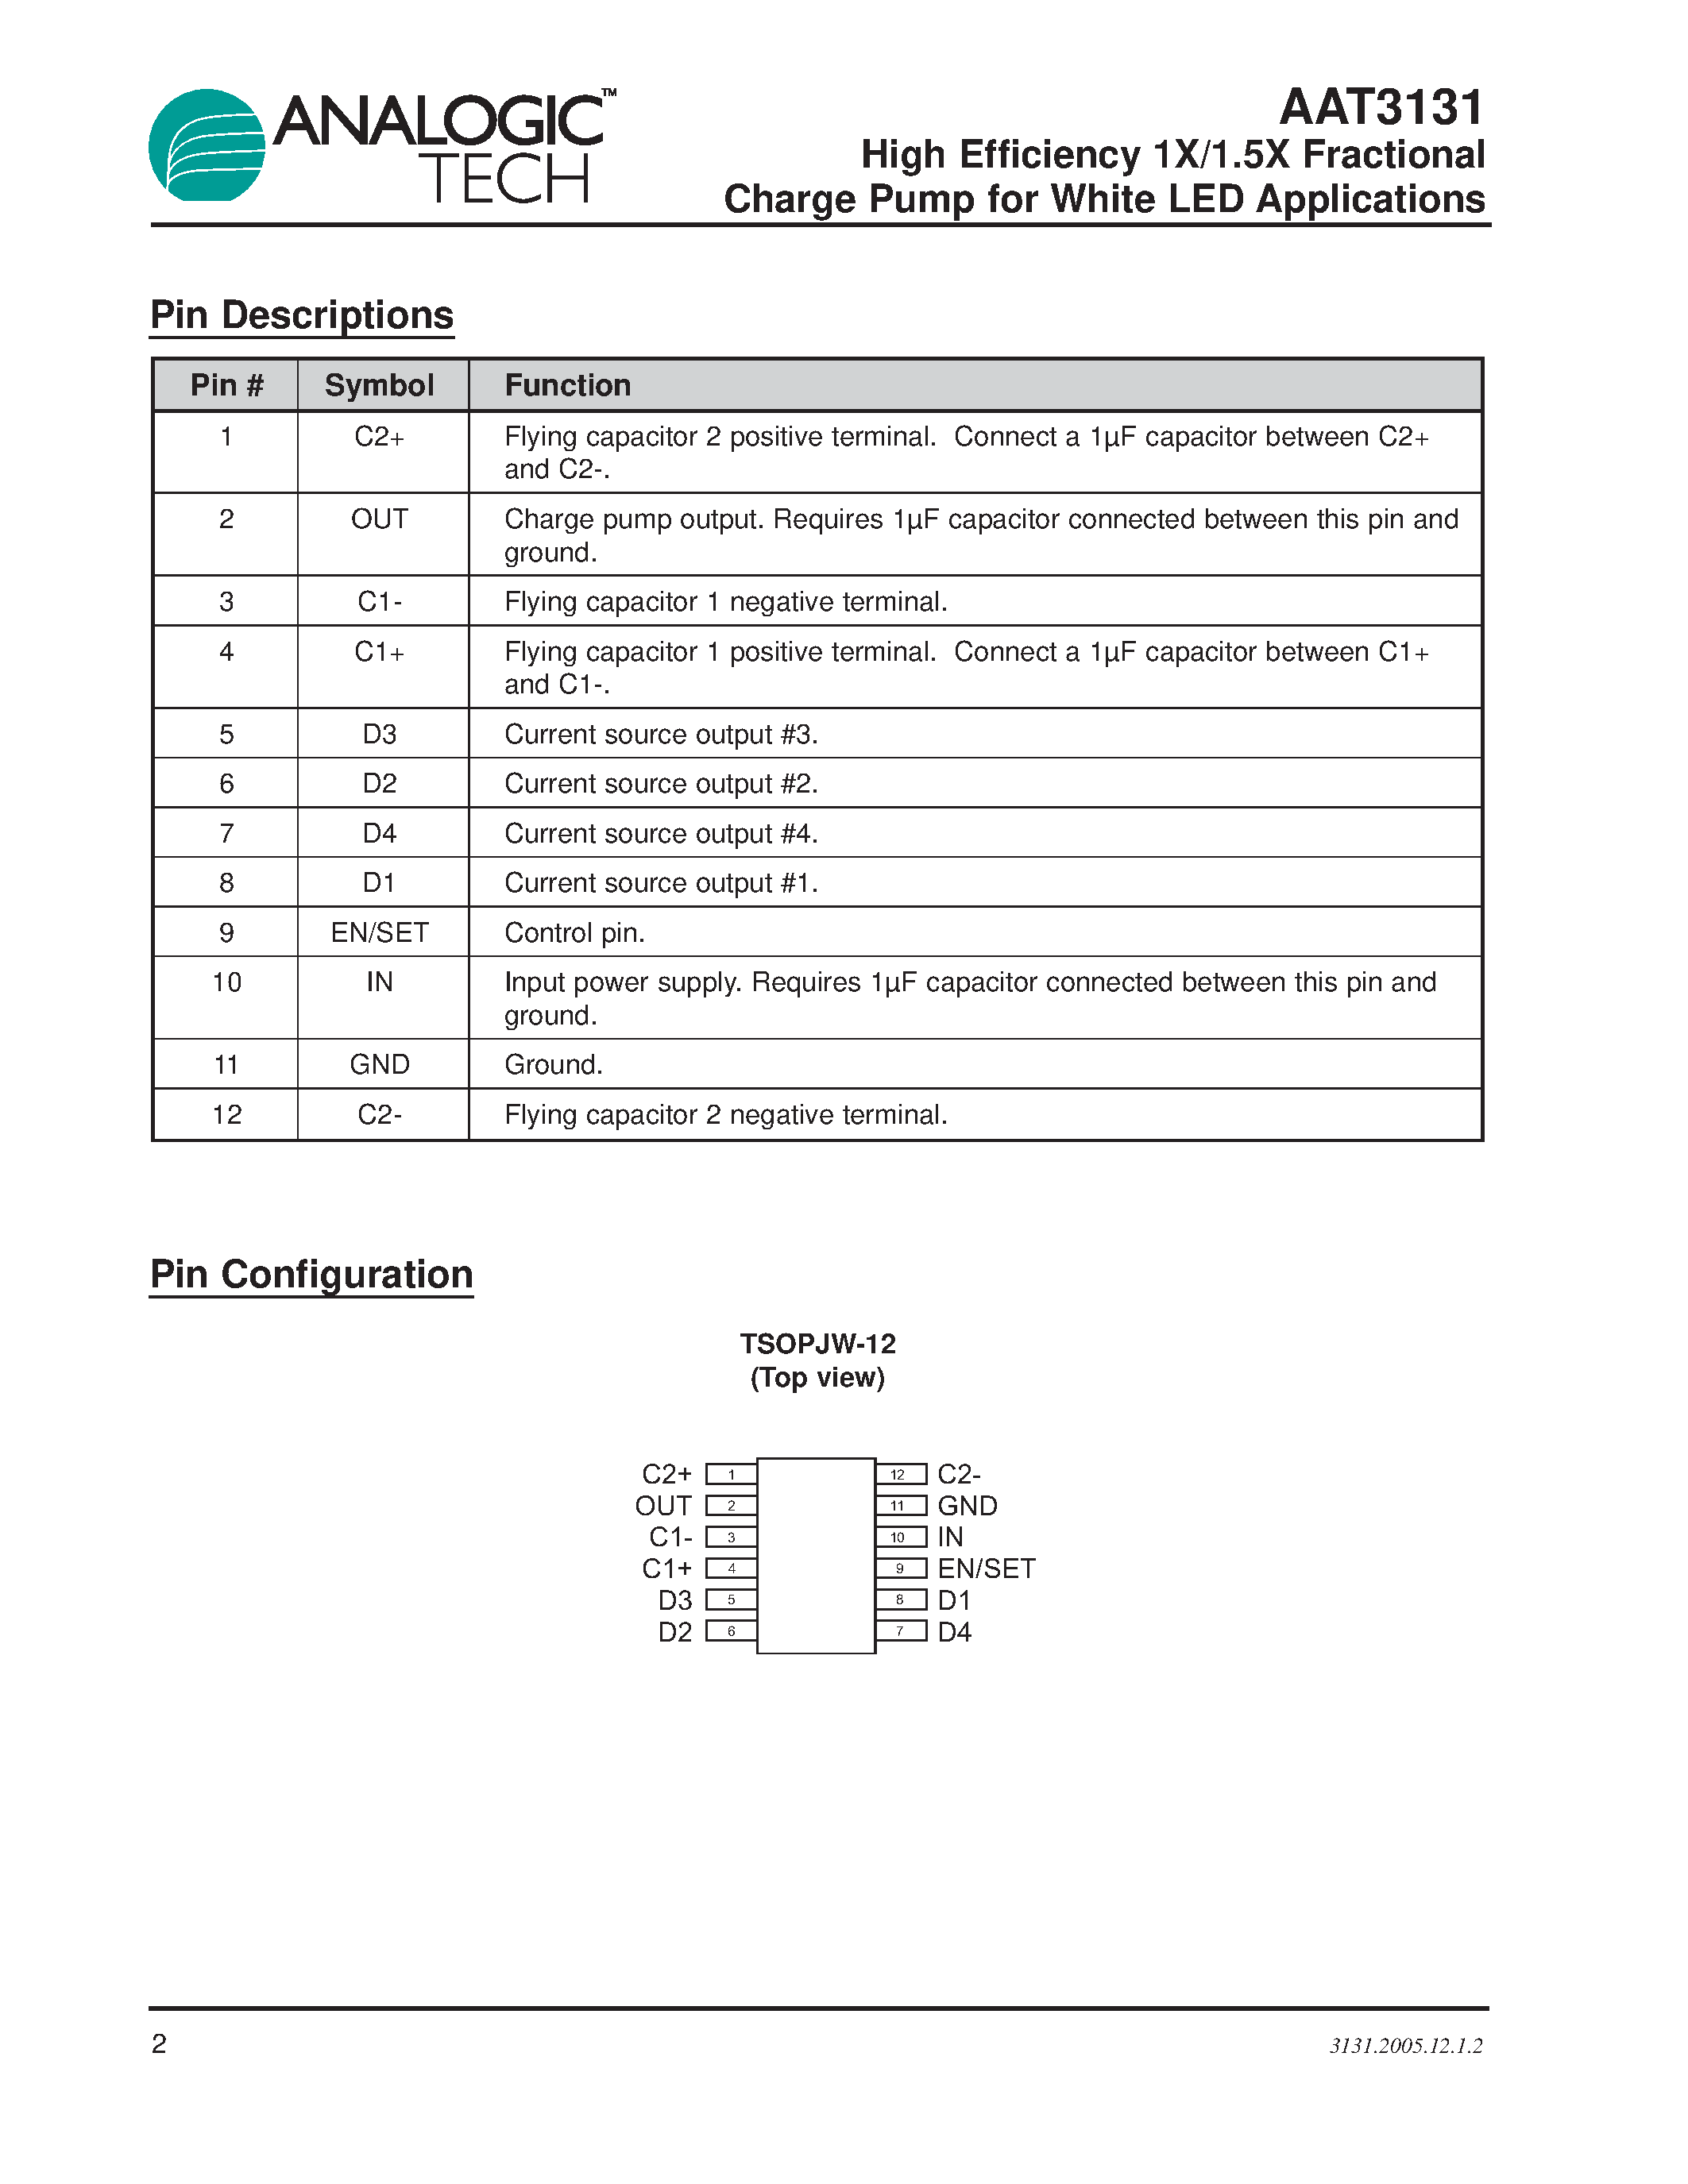 Datasheet AAT3131 - High Efficiency 1X/1.5X Fractional Charge Pump page 2